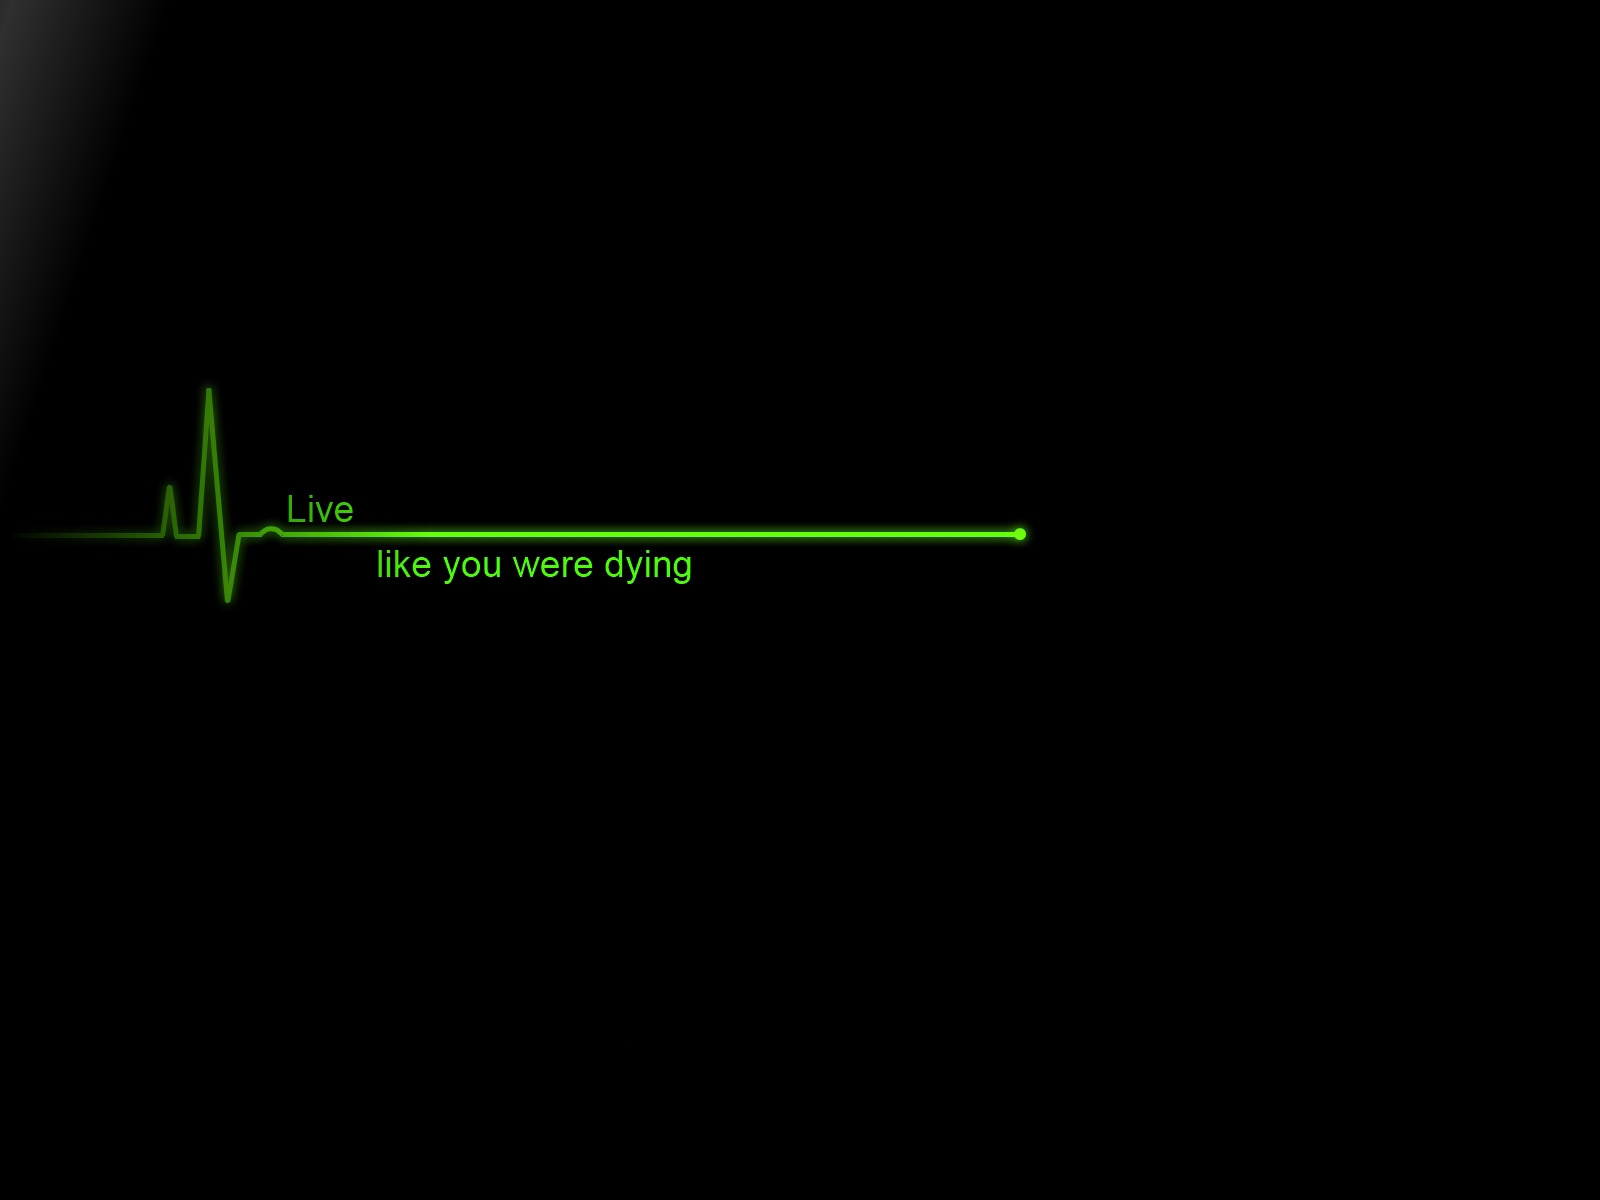 Live like you were dying for 1600 x 1200 resolution